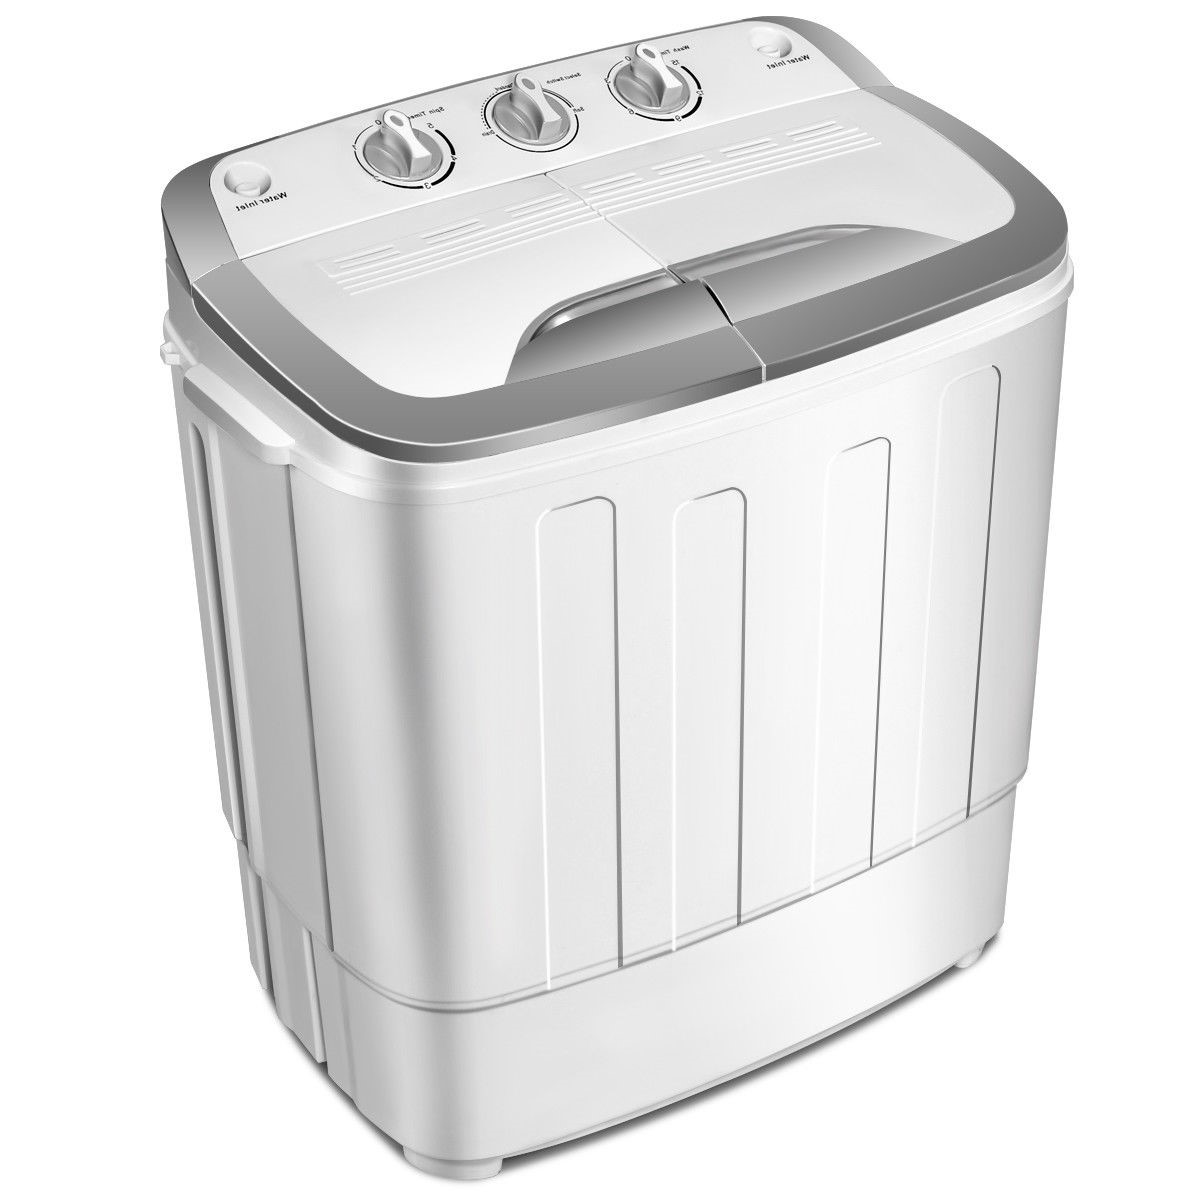 SKONYON Portable Compact Mini Twin Tub Washing Machine with Wash and Spin Cycle, Built-in Gravity Drain, 13lbs Capacity For  Dorms, College Rooms, RV’s - image 1 of 9